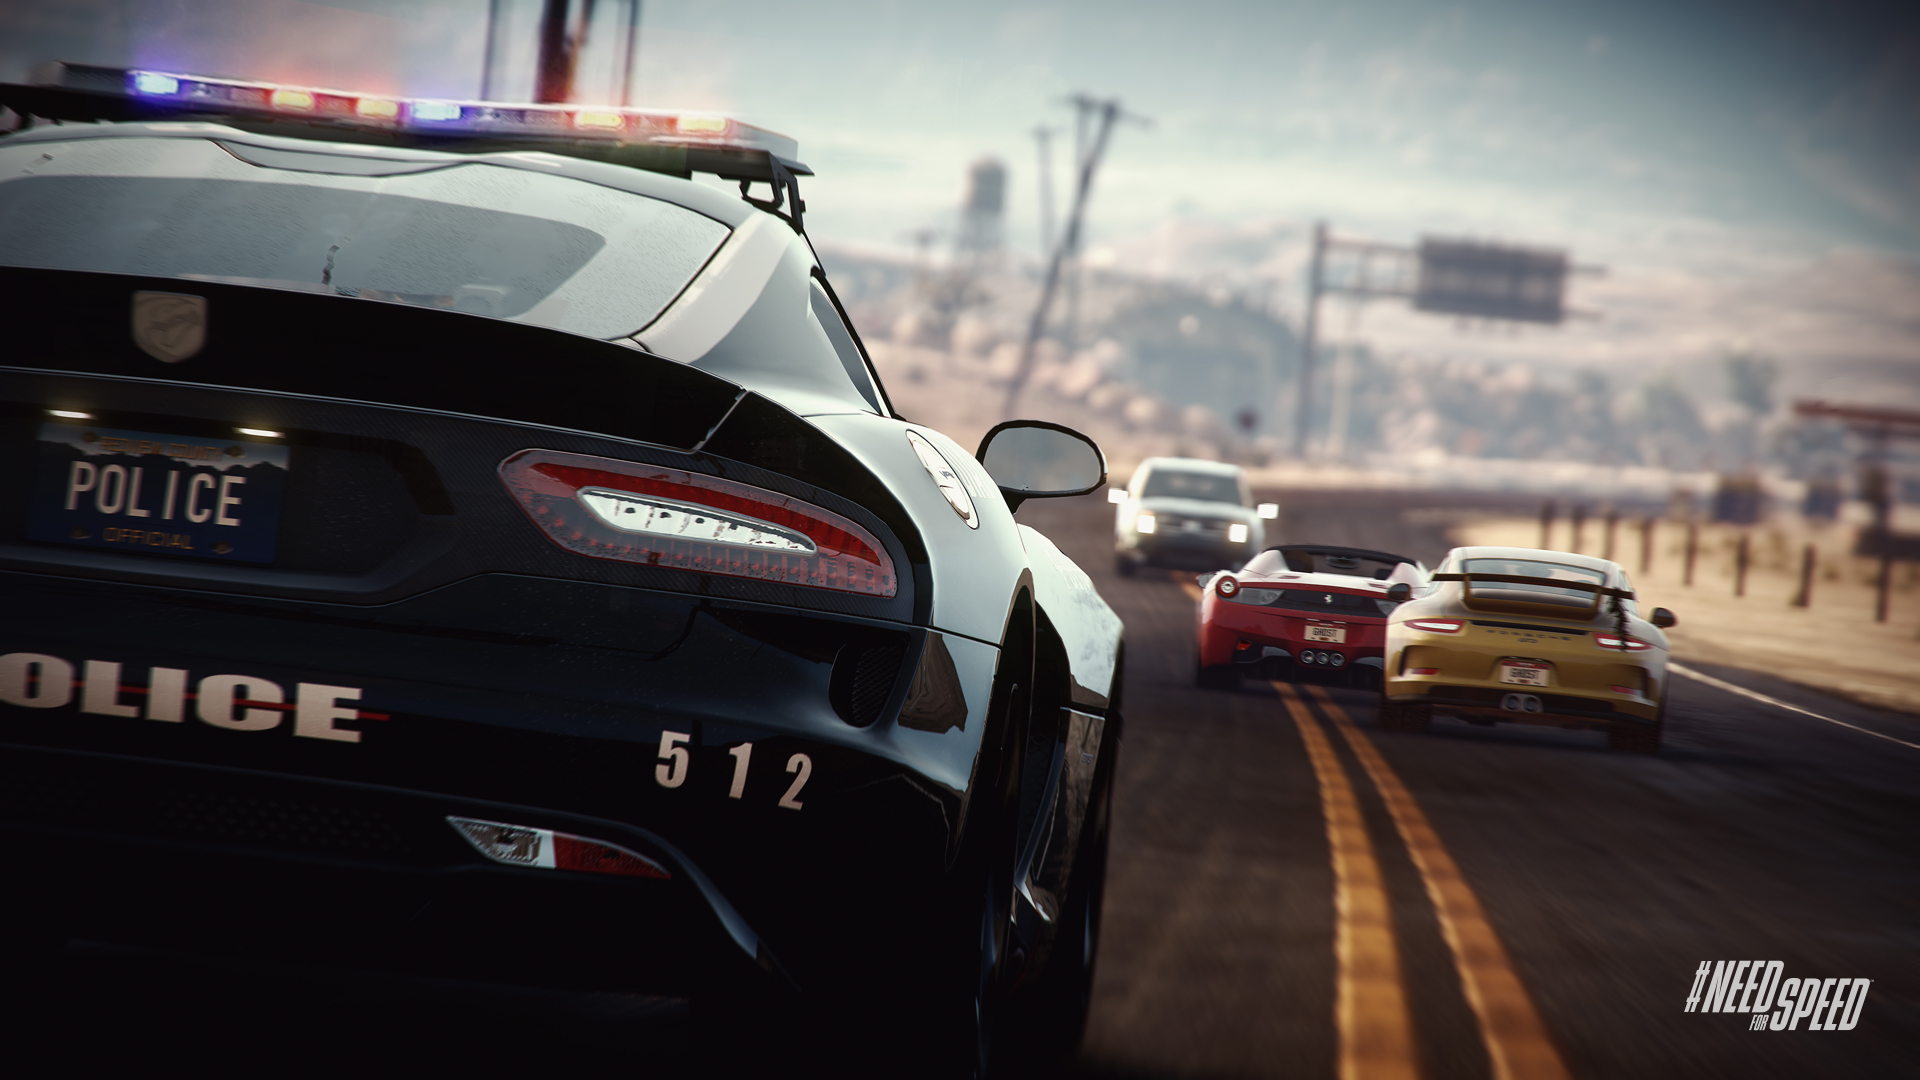 New Need For Speed Rivals Trailer Hits From Gamescom: Video